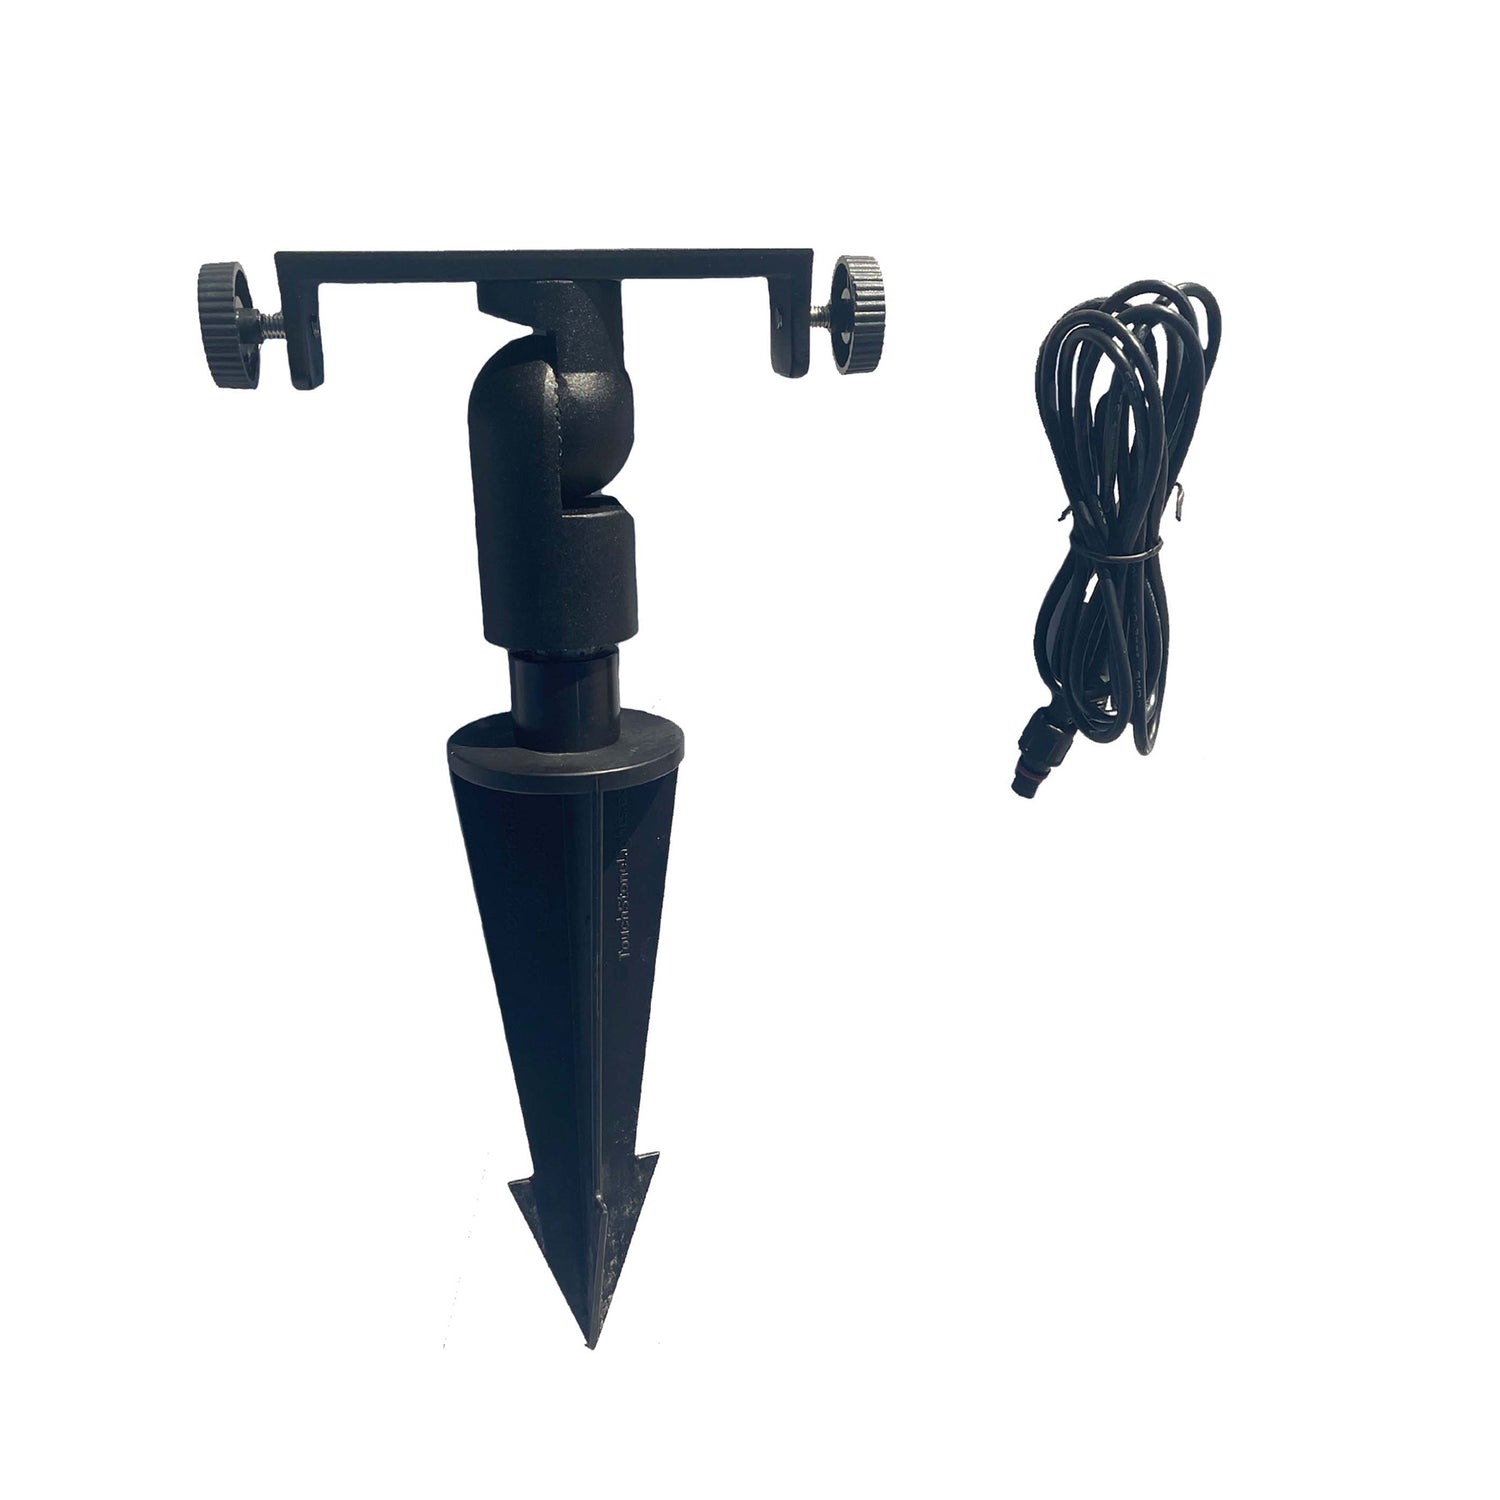 Remote Panel Bracket with Ground stake and Extension Cable